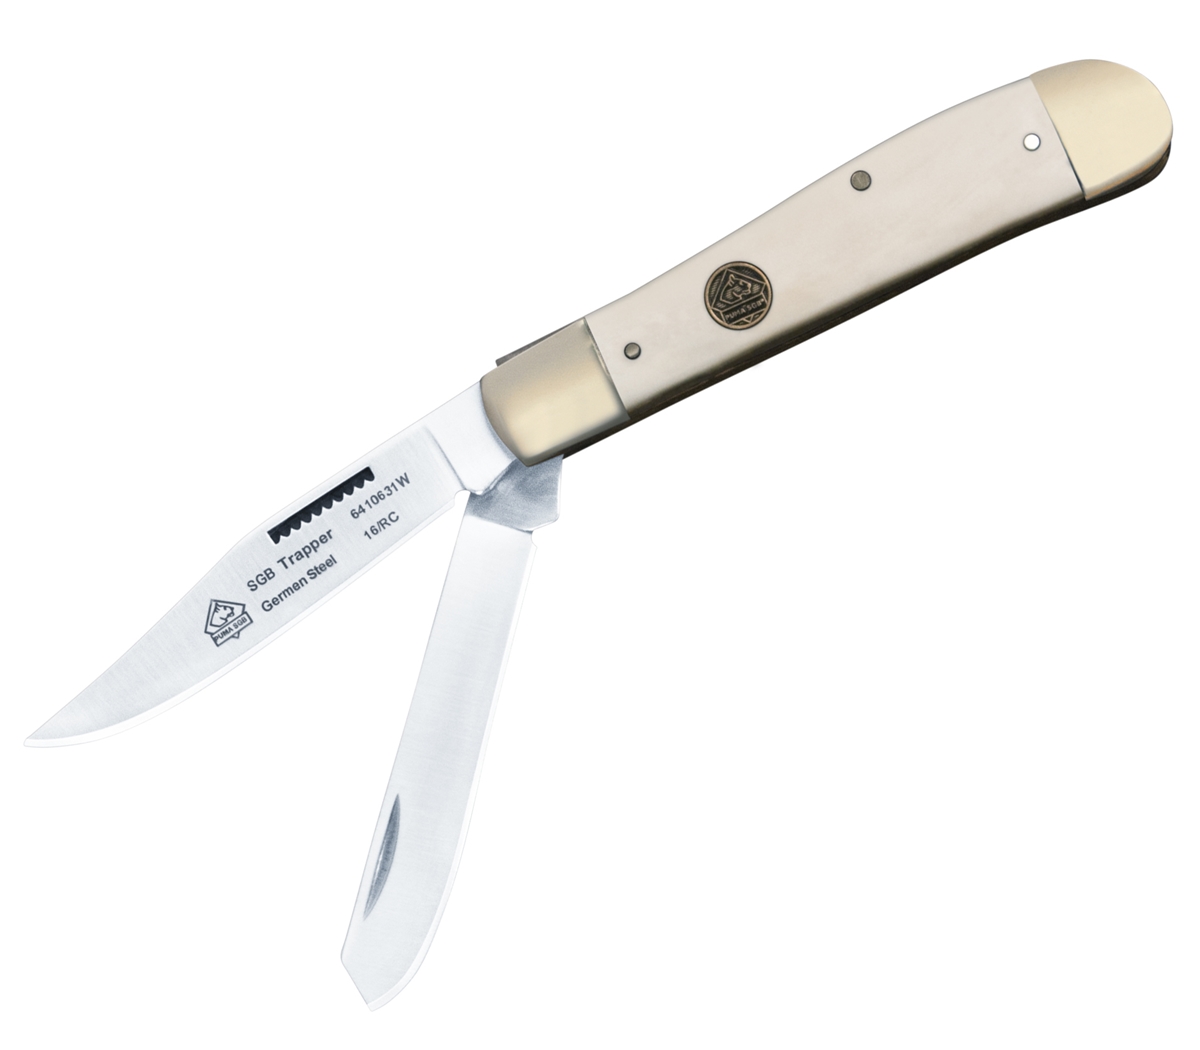 Puma SGB Trapper Smooth White Bone Folding Pocket Knife - Buy One Get One Free Free Knife will be added to the order